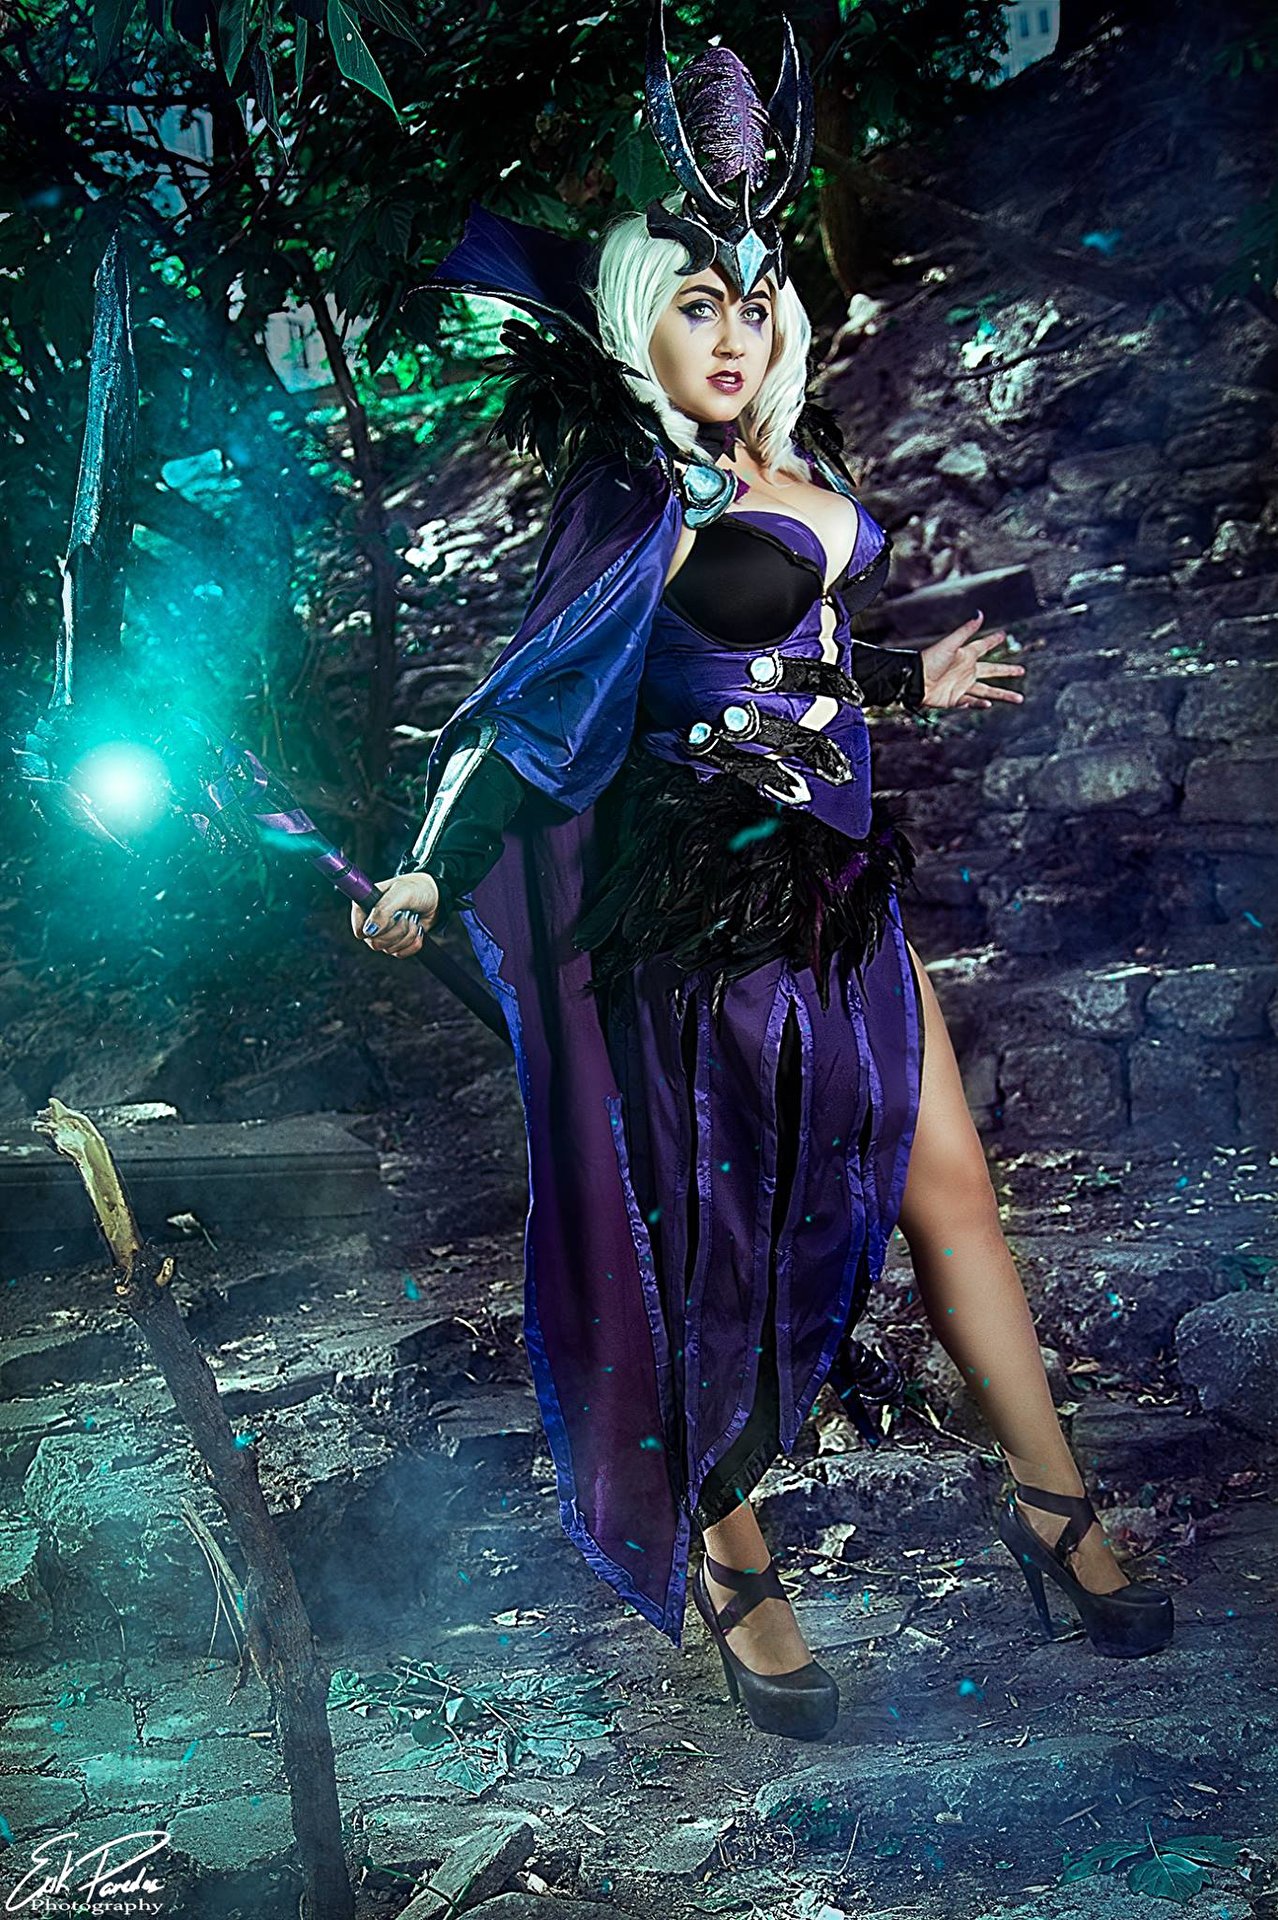 Cospix.net photo featuring Audrey D. Cosplay